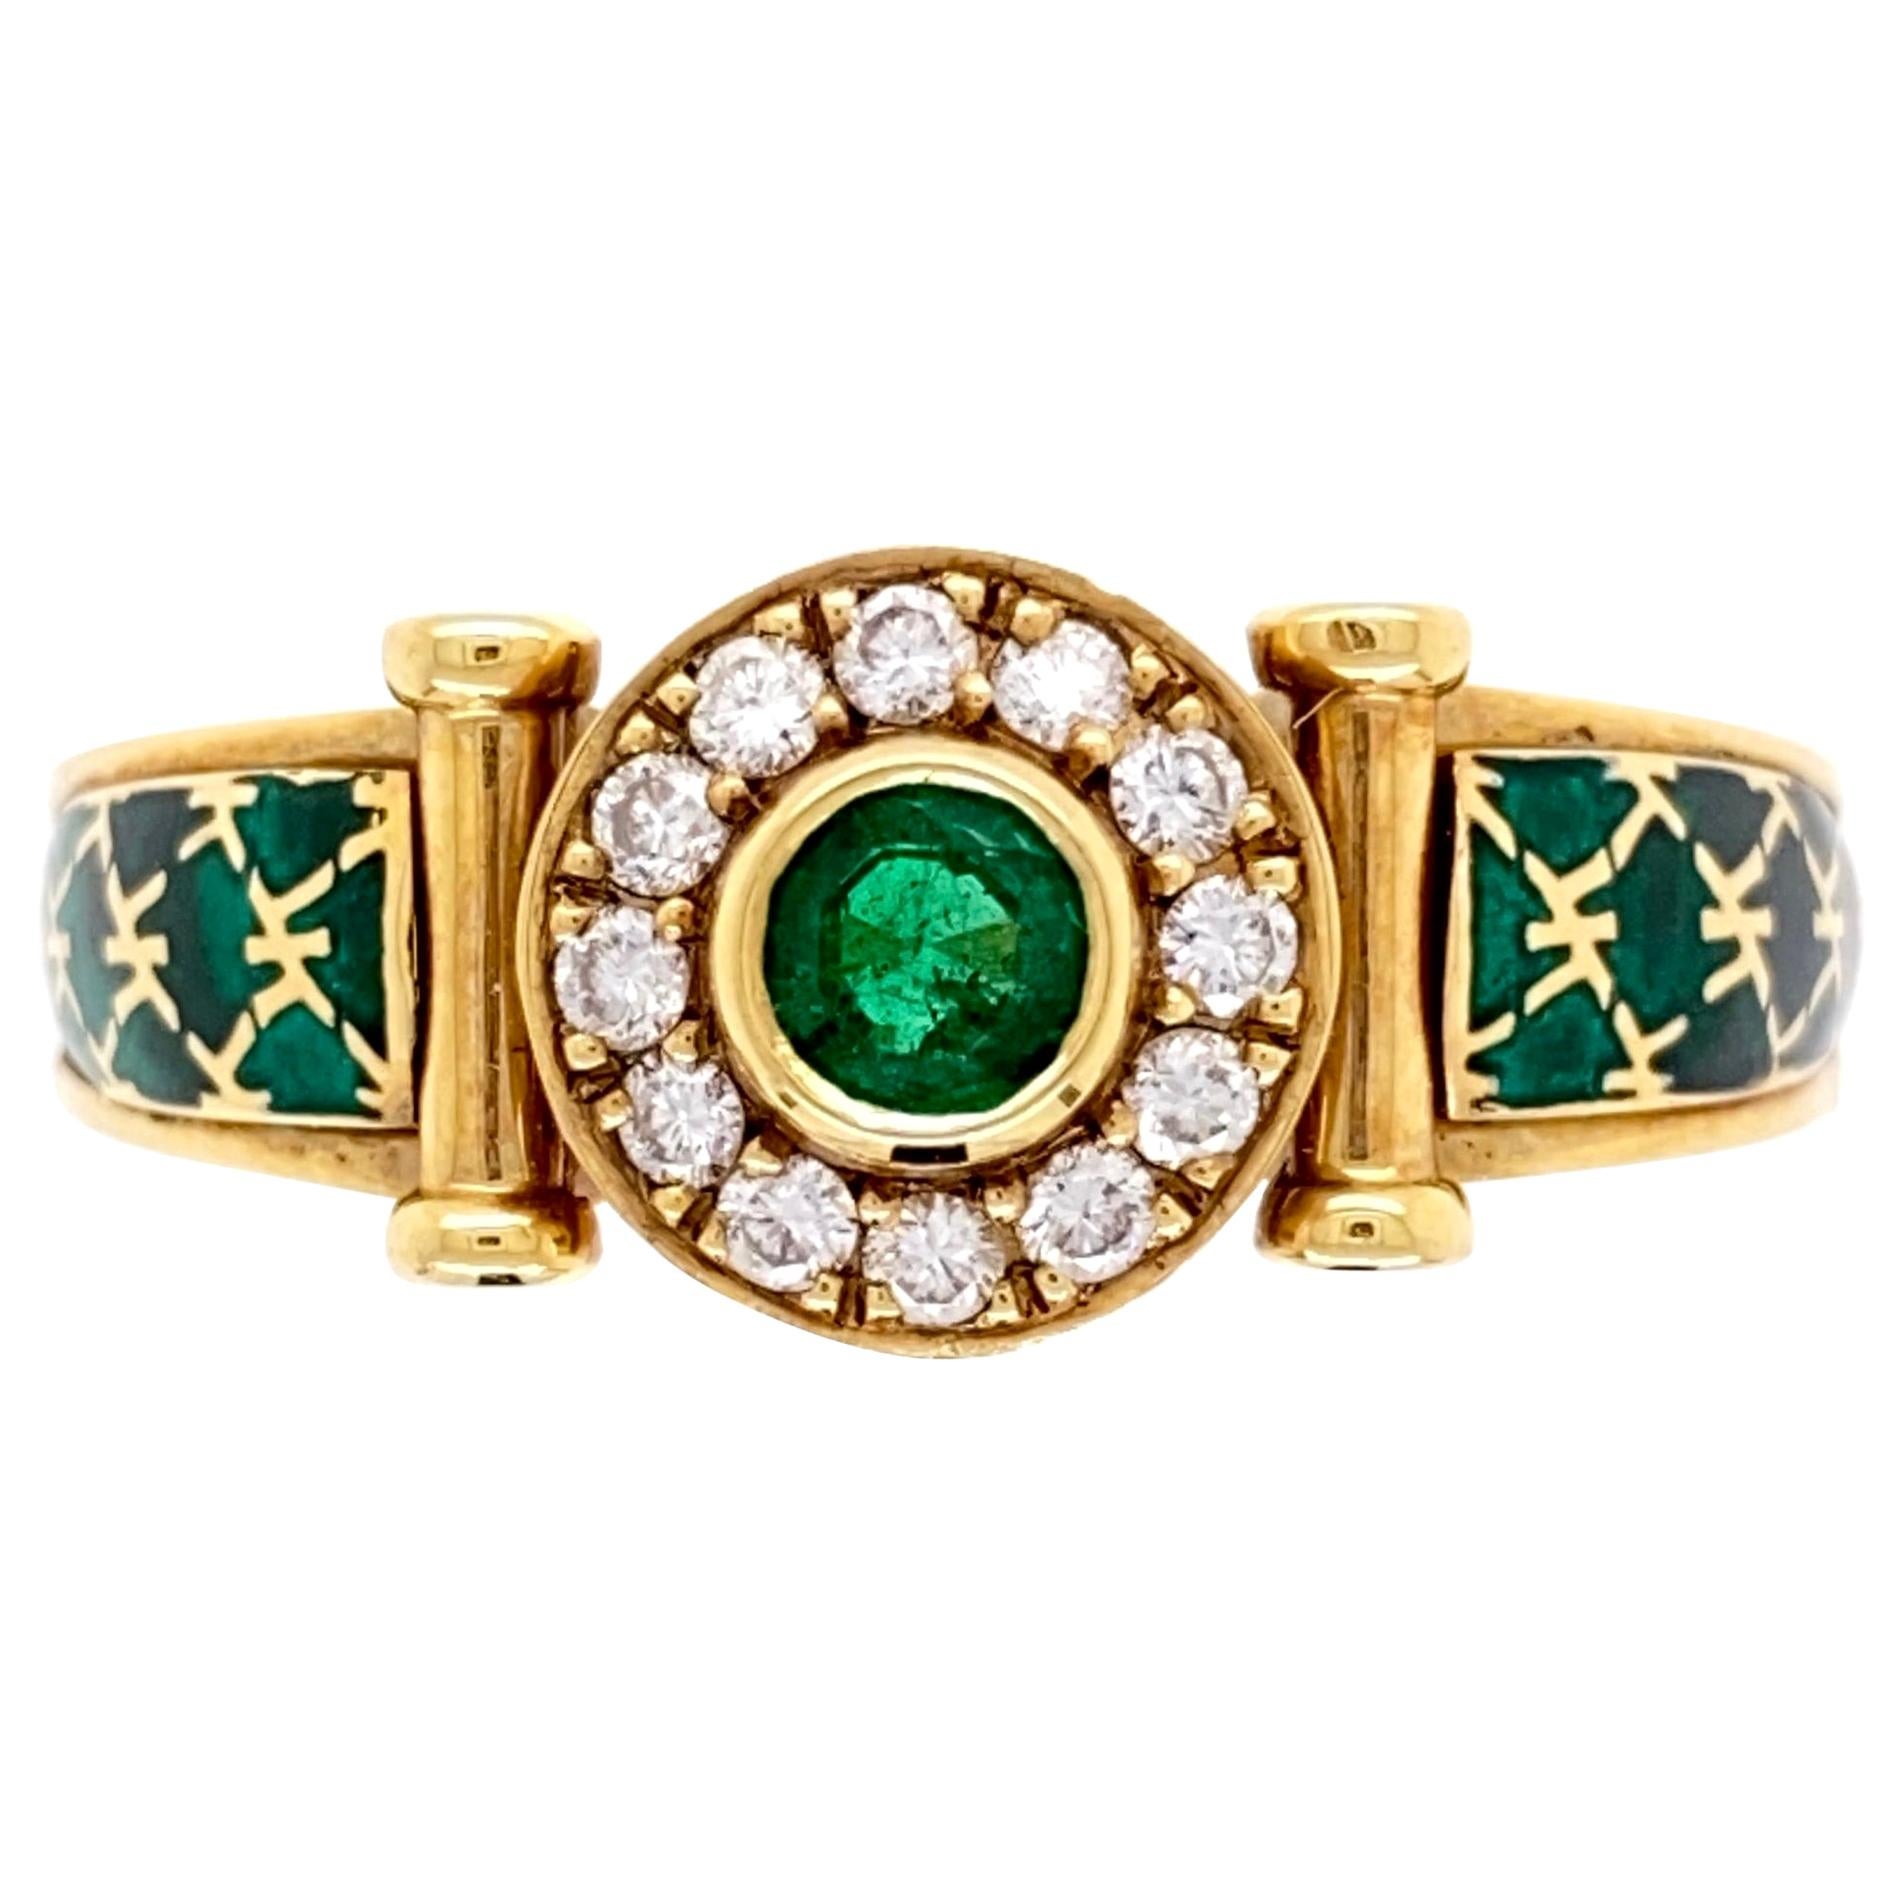 Emerald and Diamond Green Enamel Gold Cocktail Ring Fine Estate Jewelry France